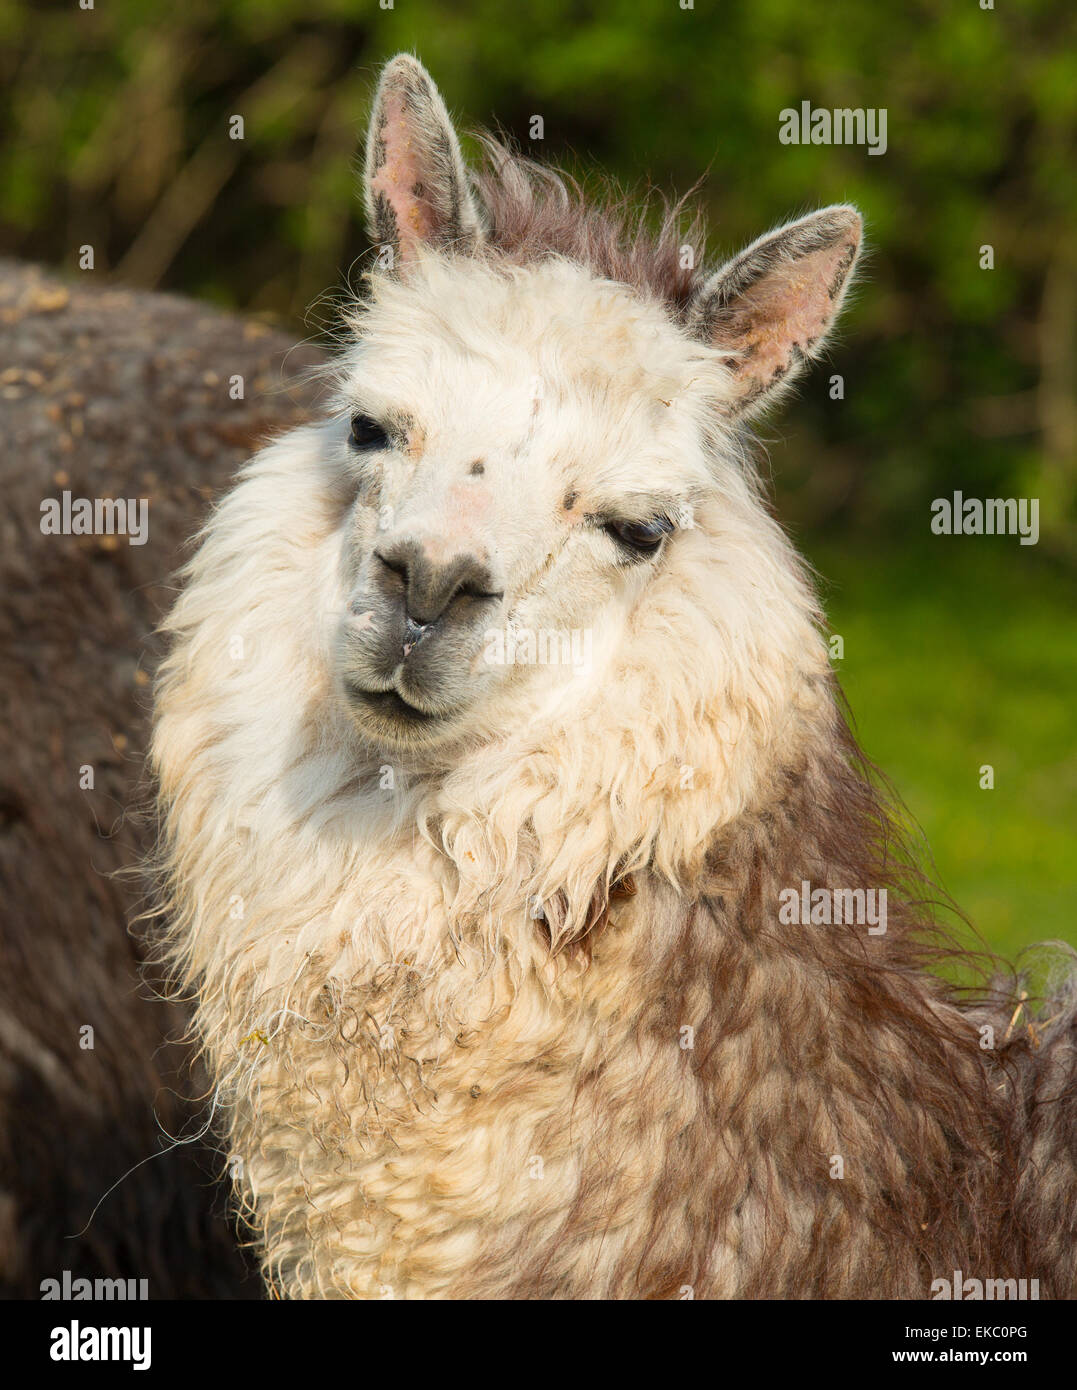 Cute Alpaca from South America camelid resembles small llama with coat used for wool and cute smile Stock Photo